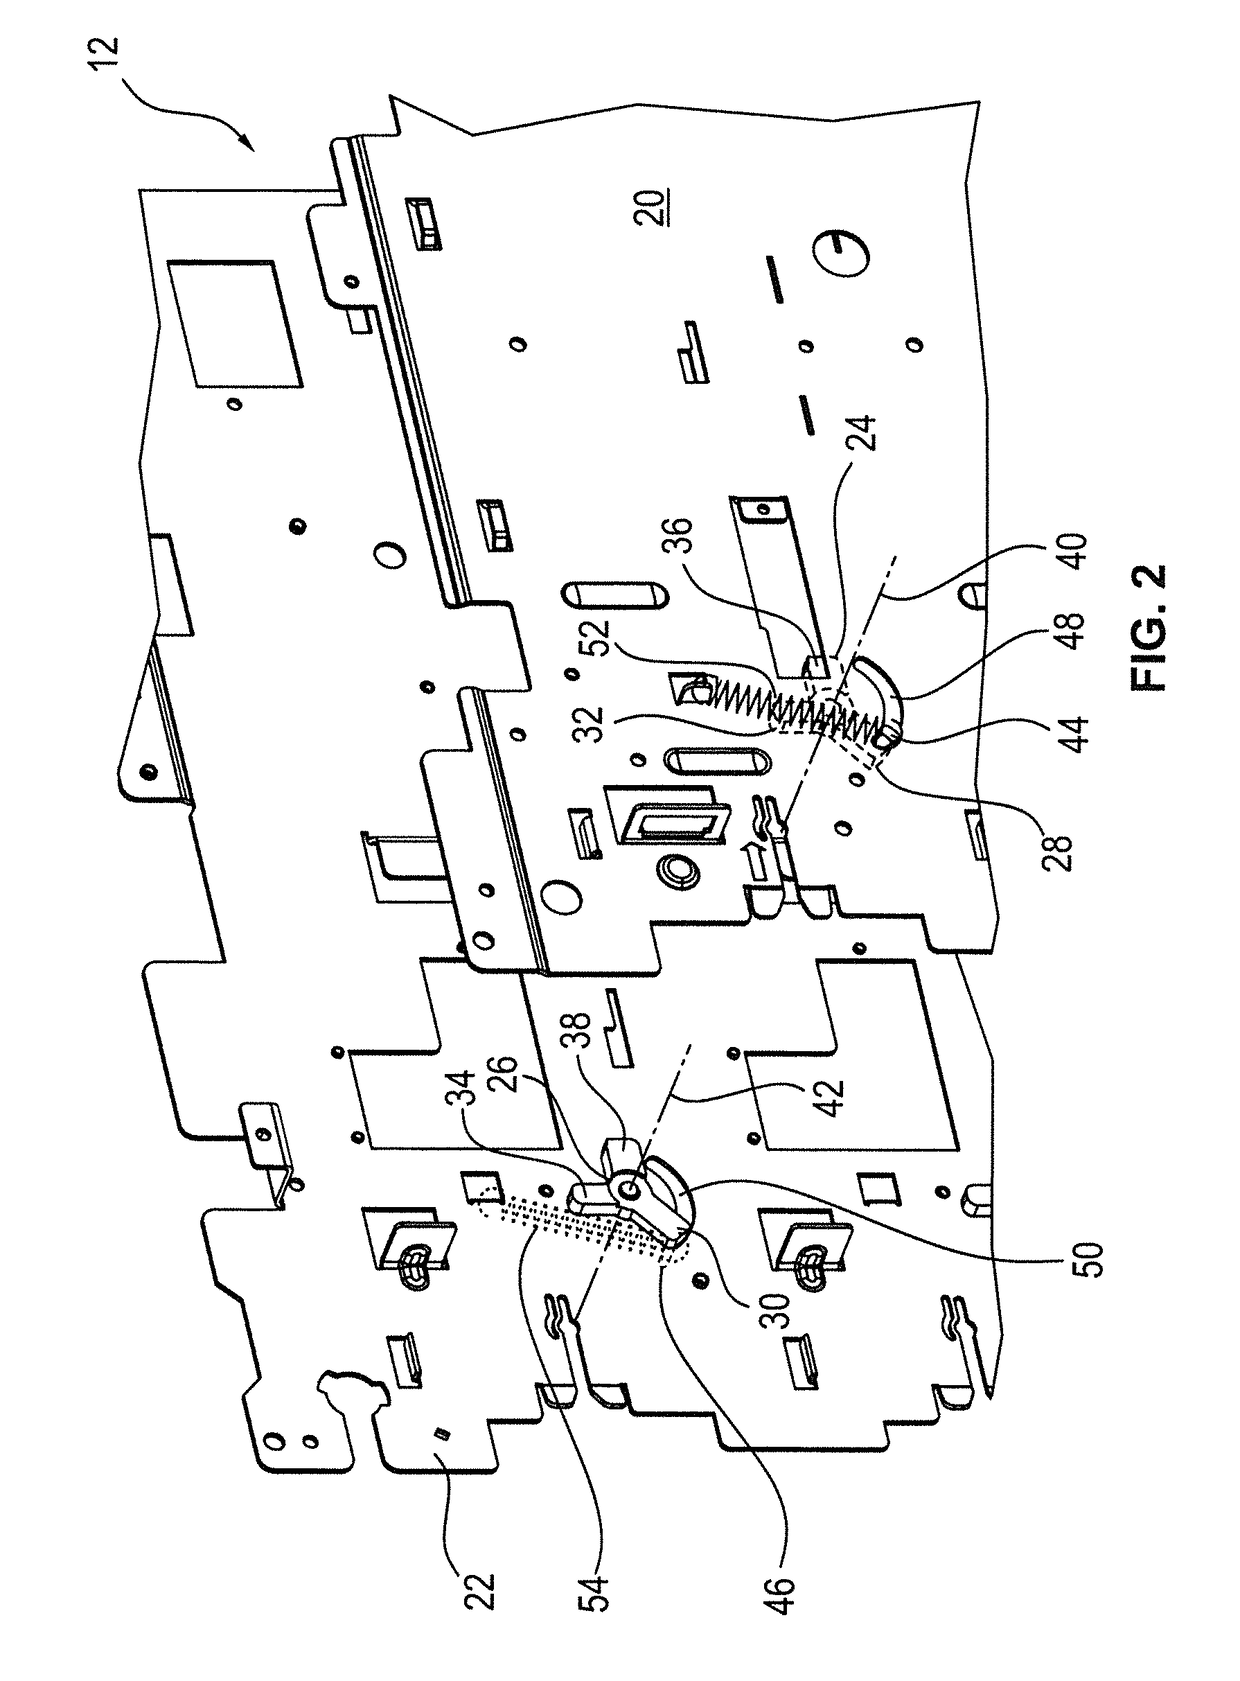 Automated teller machine with an automatically actuatable locking element for locking cash boxes received in receiving compartments in these receiving compartments